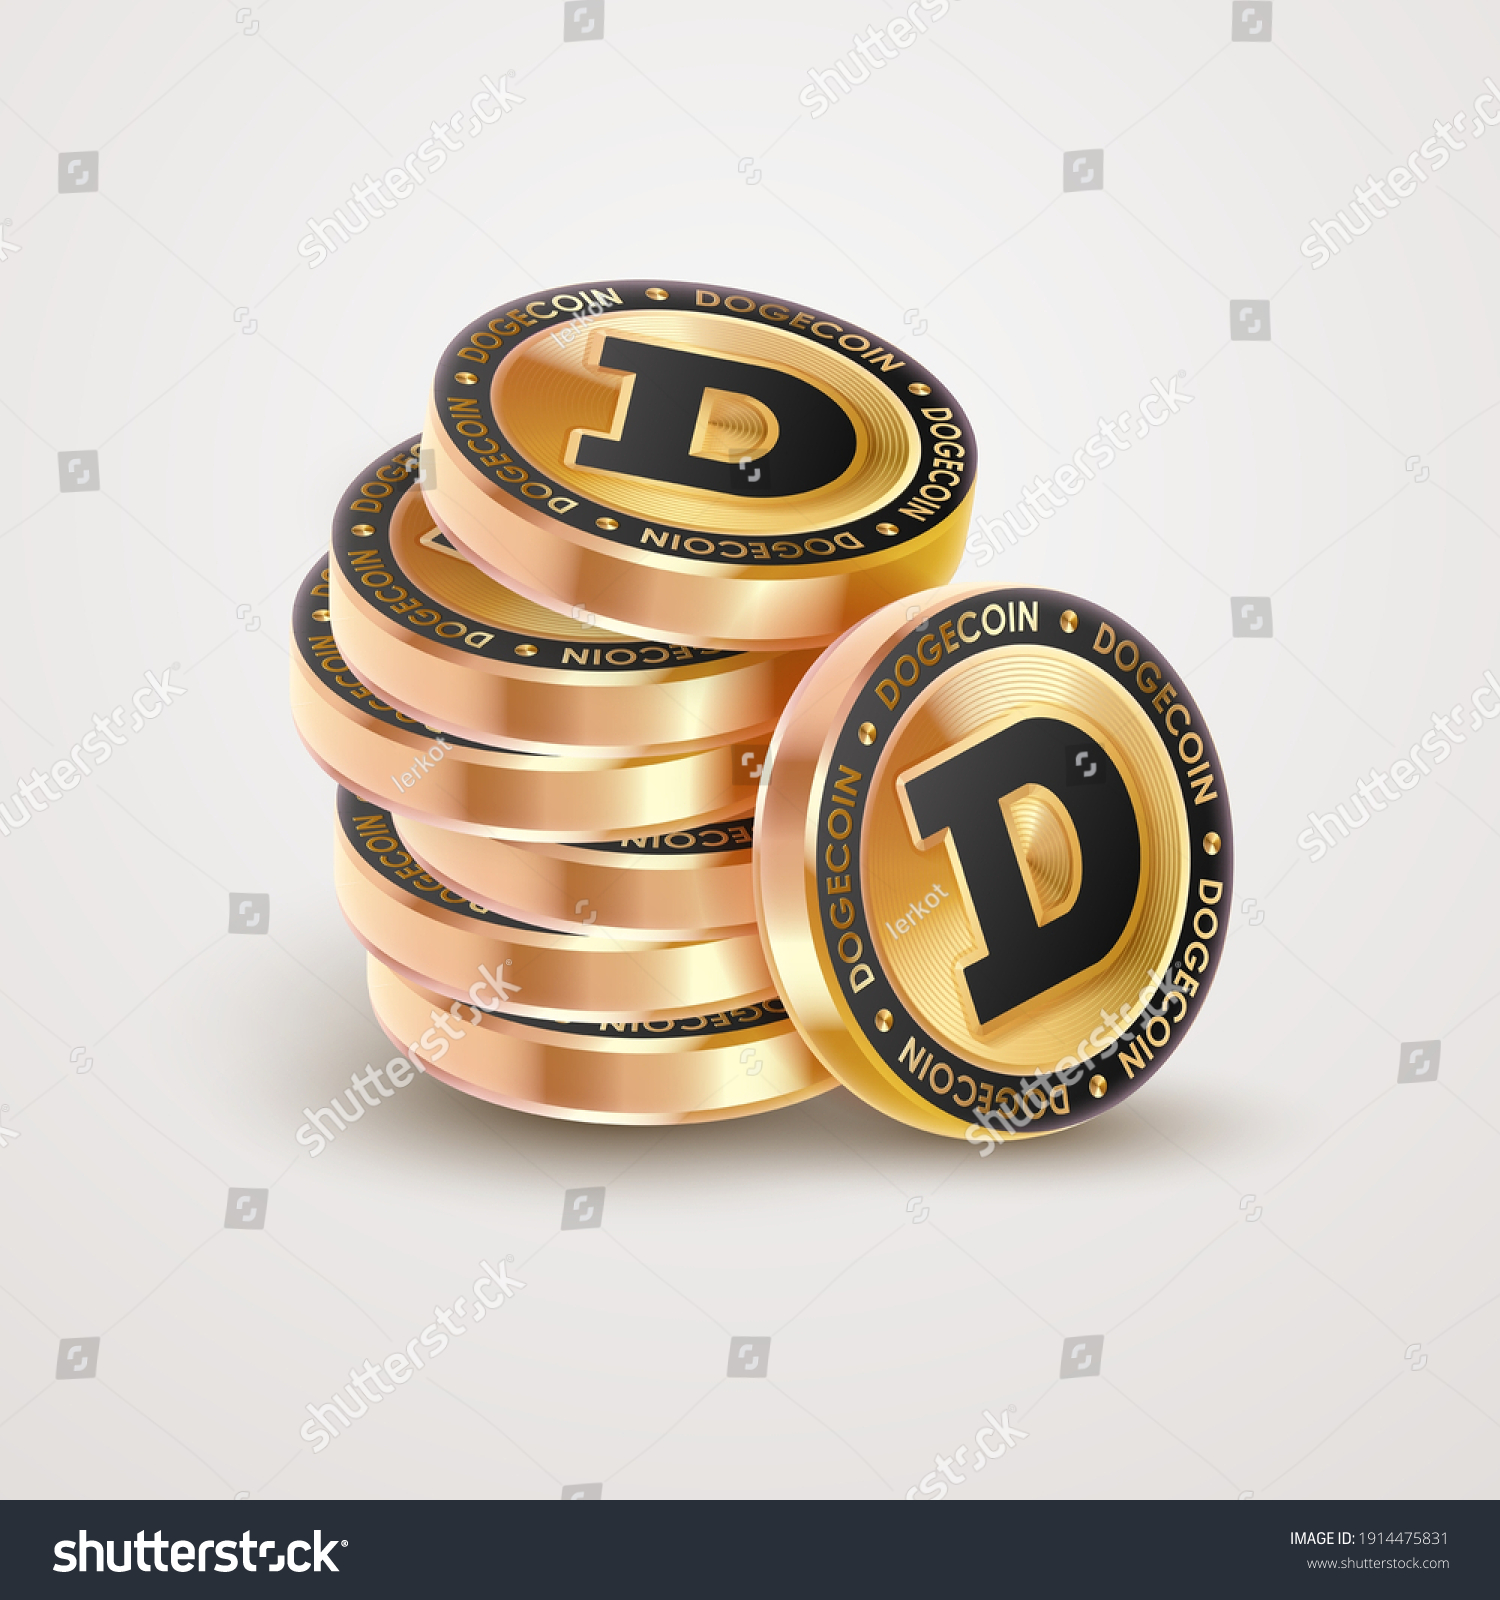 SVG of Stack of gold, golden, black coins, dogecoin, crypto currency on gray background. Vector illustration for card, party, design, flyer, poster, decor, banner, web, advertising. svg